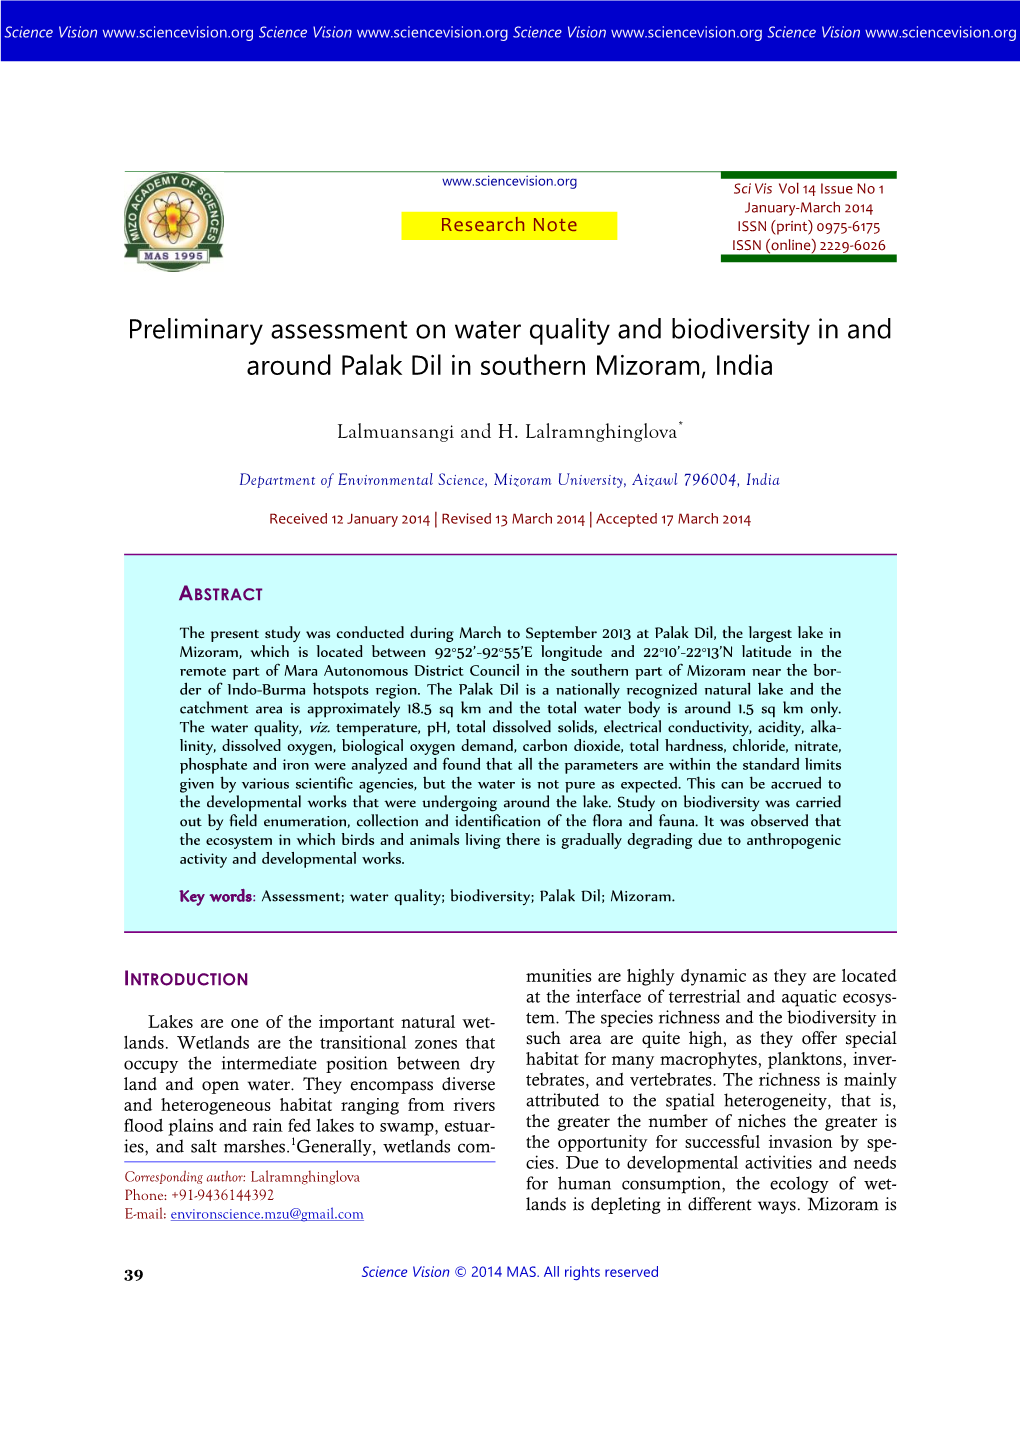 Preliminary Assessment on Water Quality and Biodiversity in and Around Palak Dil in Southern Mizoram, India